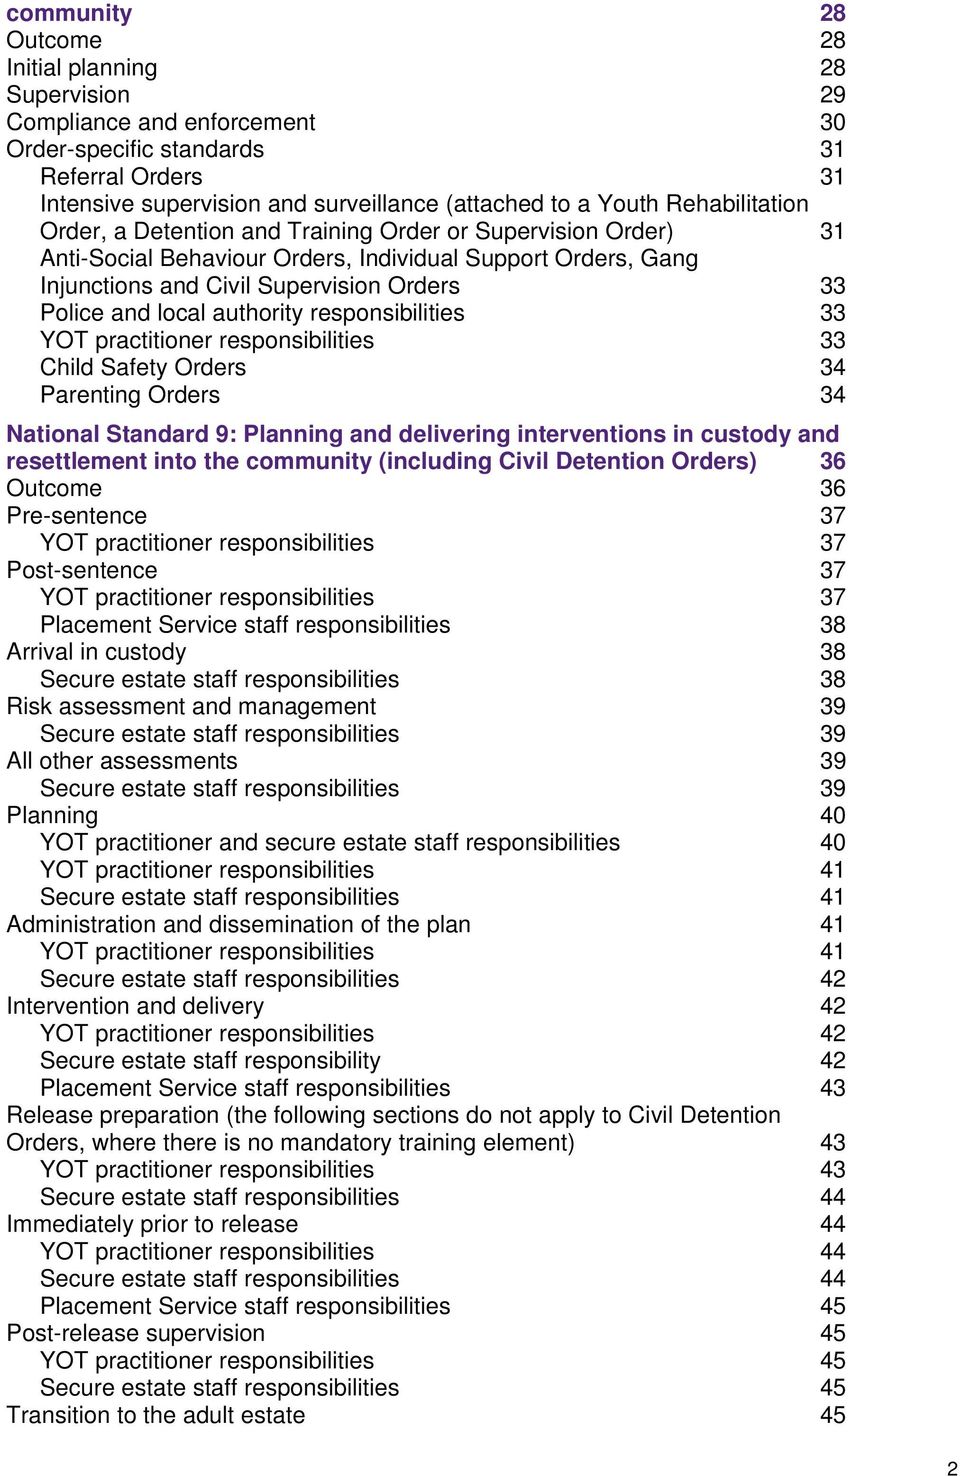 local authority responsibilities 33 YOT practitioner responsibilities 33 Child Safety Orders 34 Parenting Orders 34 National Standard 9: Planning and delivering interventions in custody and